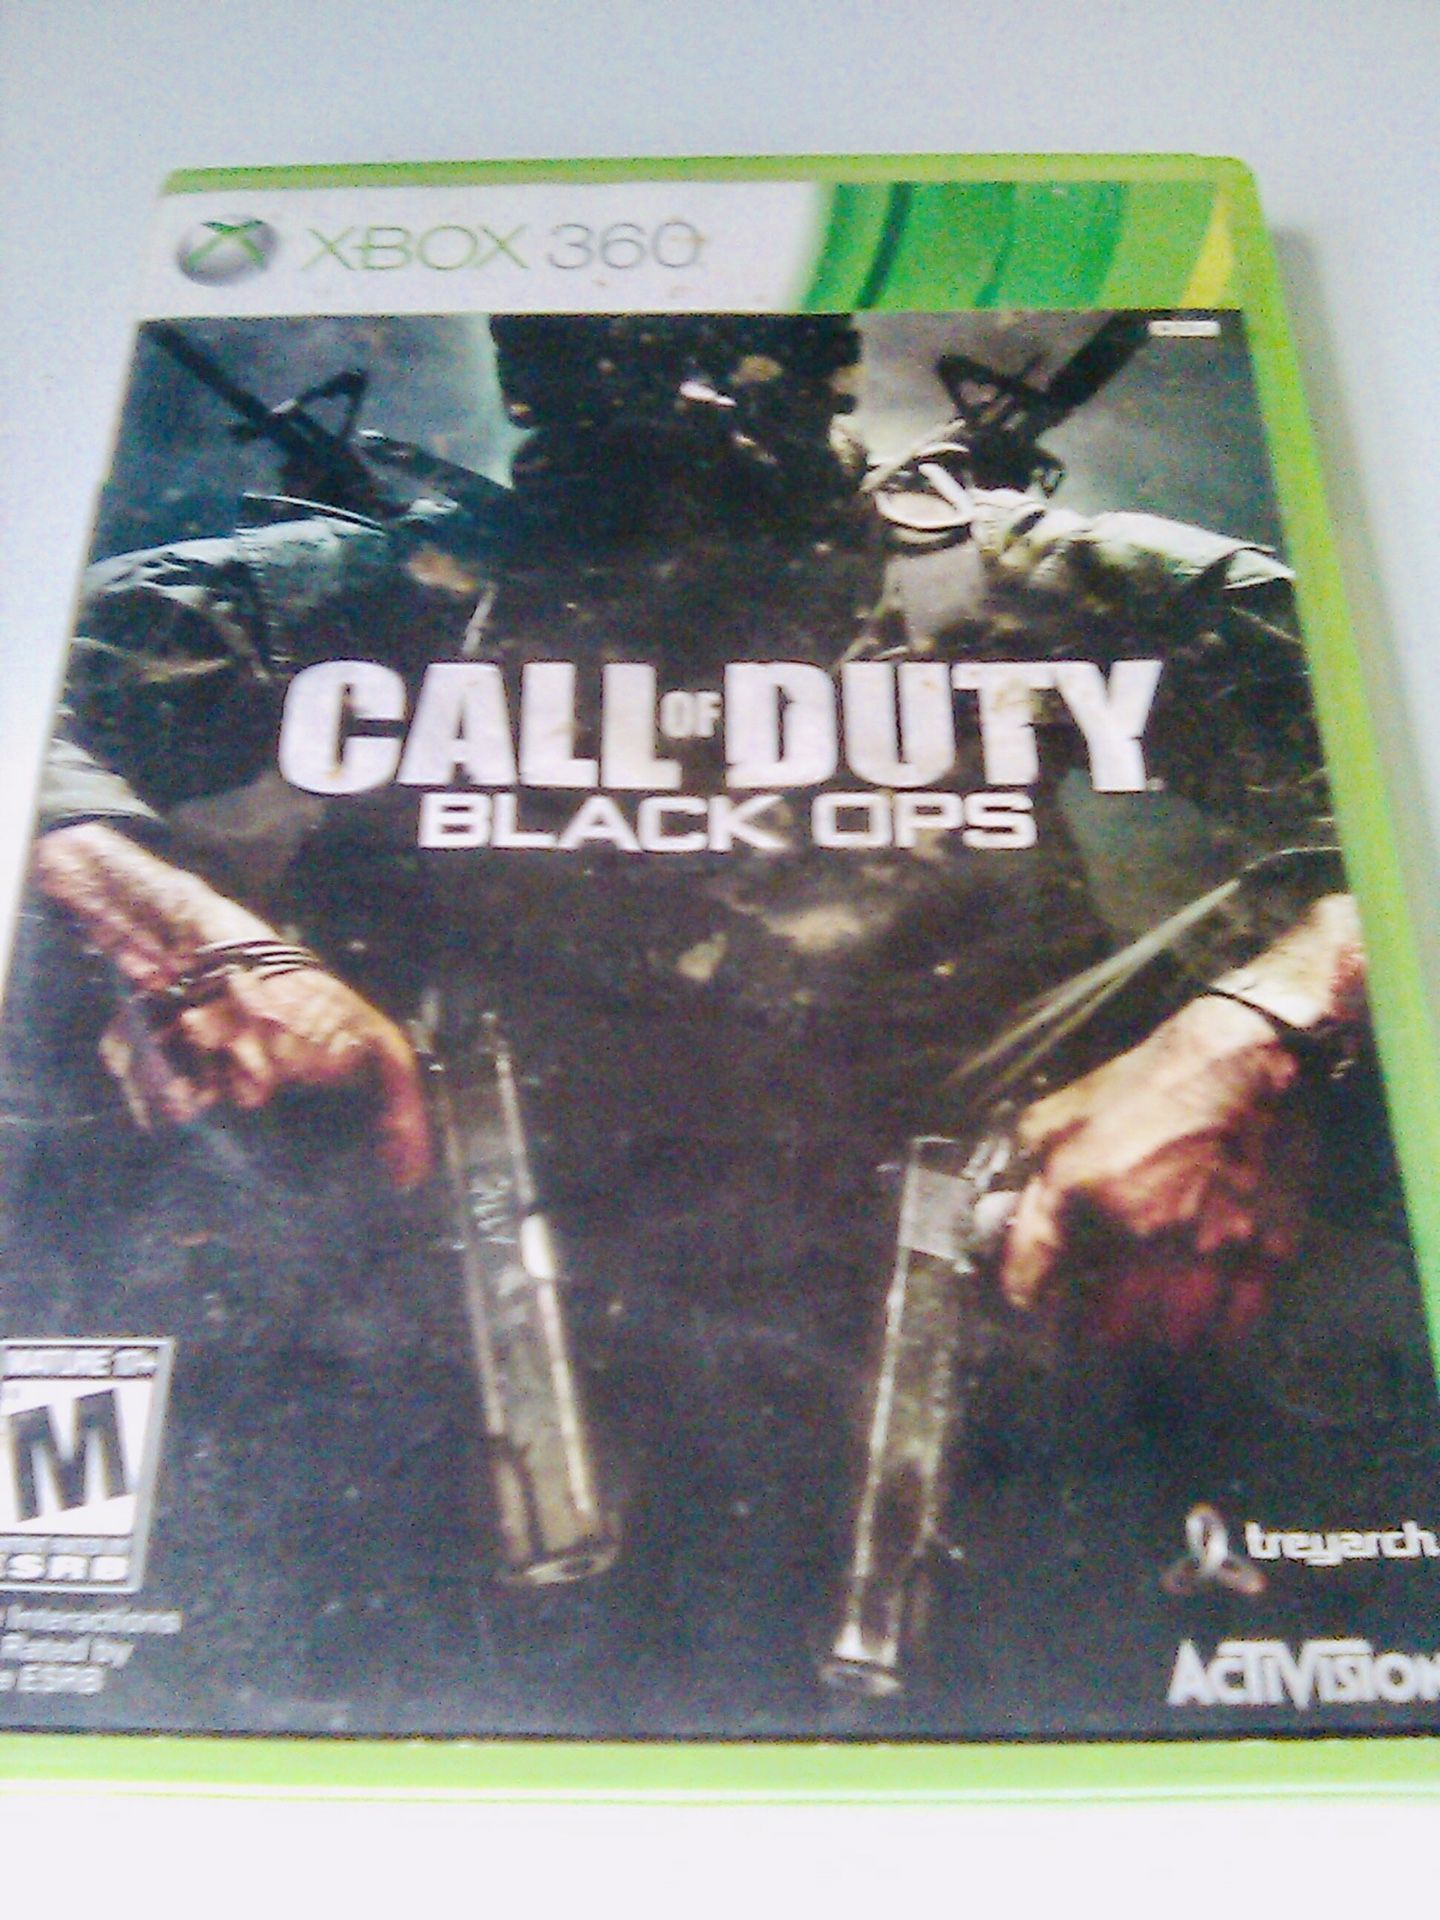 Call of duty black ops (Xbox 360)